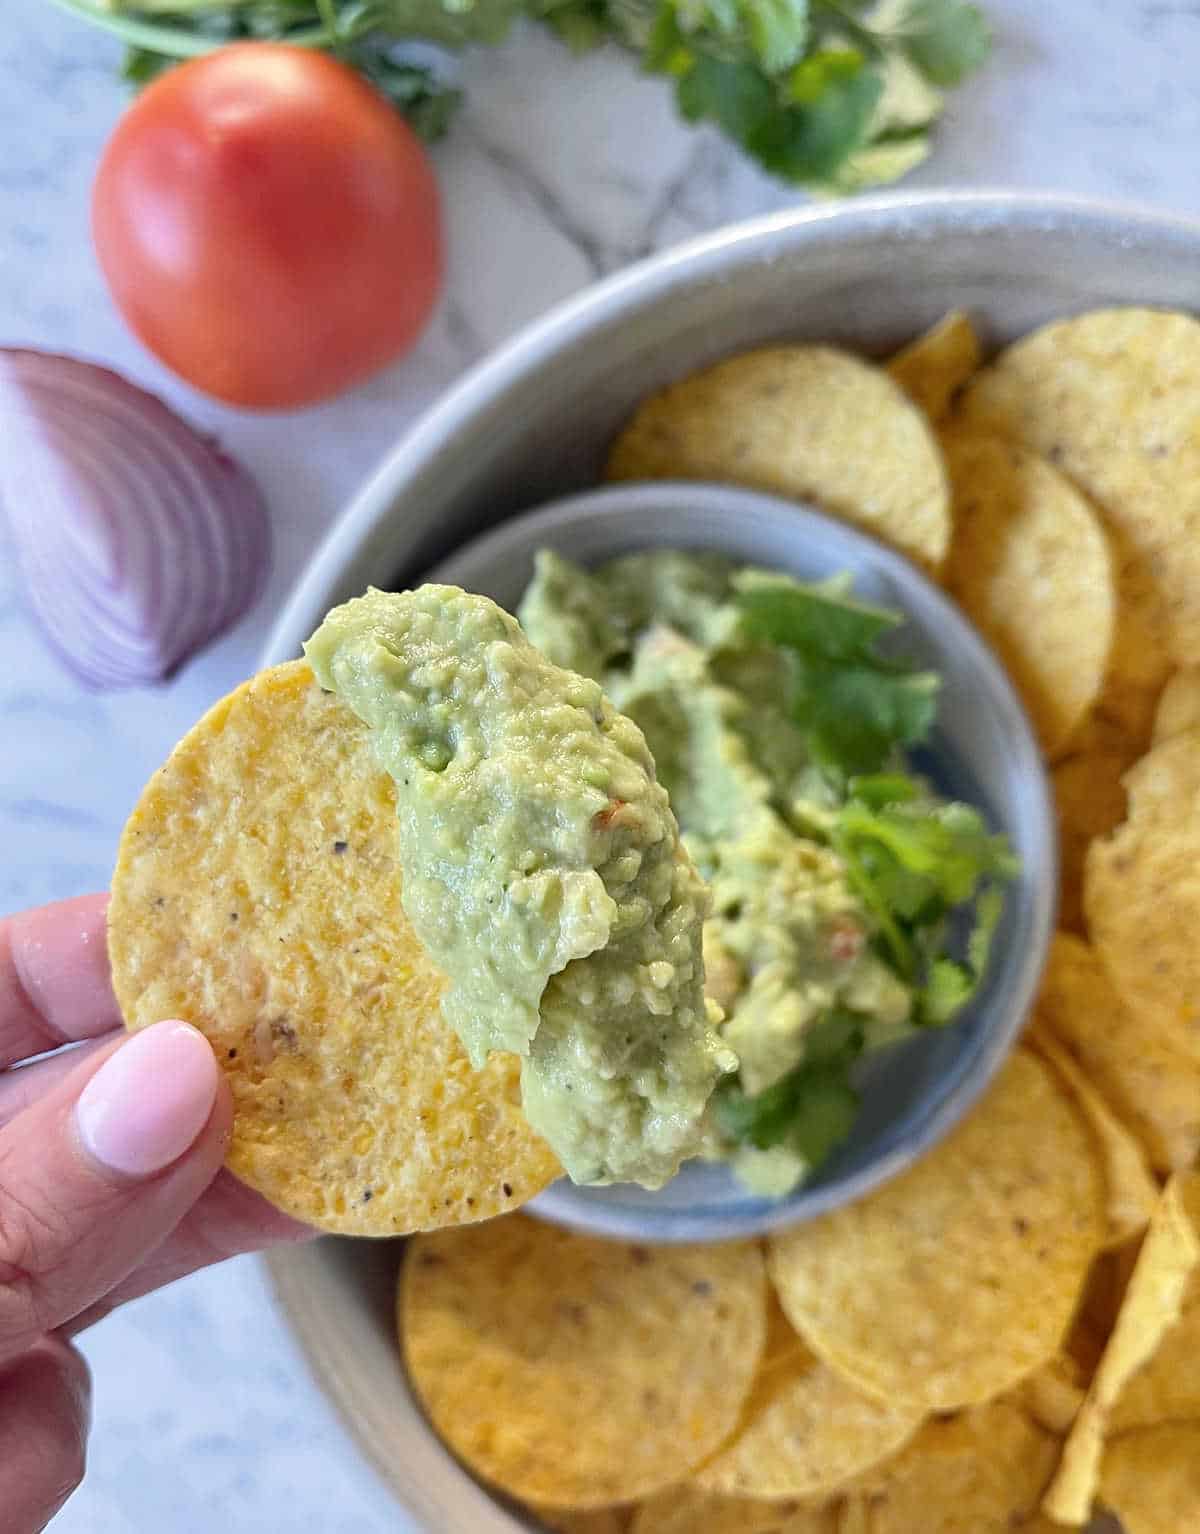 Corn chip scooping up guacamole.